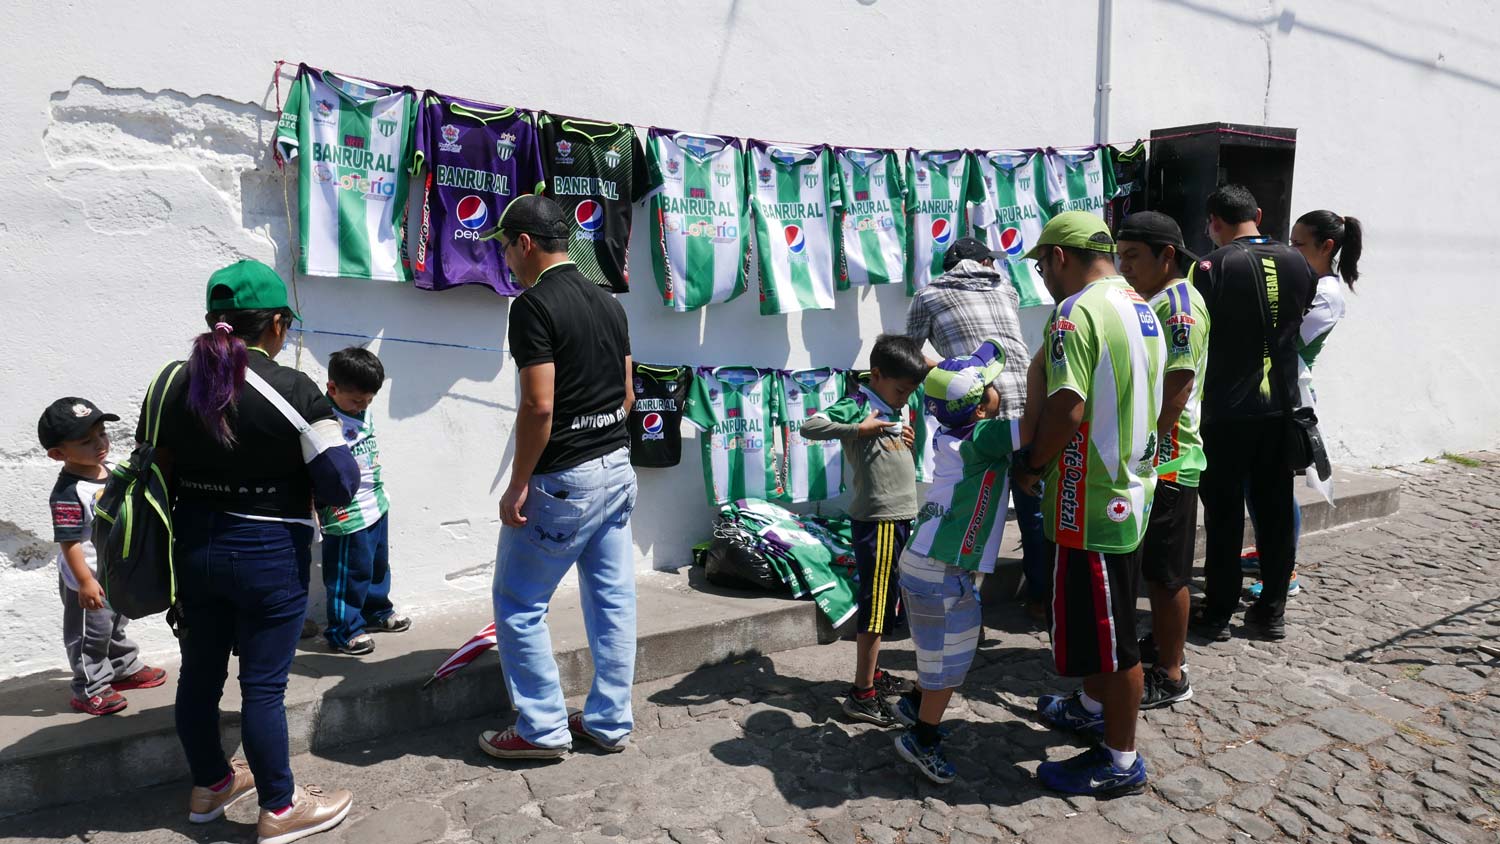 Selling shirts of the local club in Antigua Guatemala